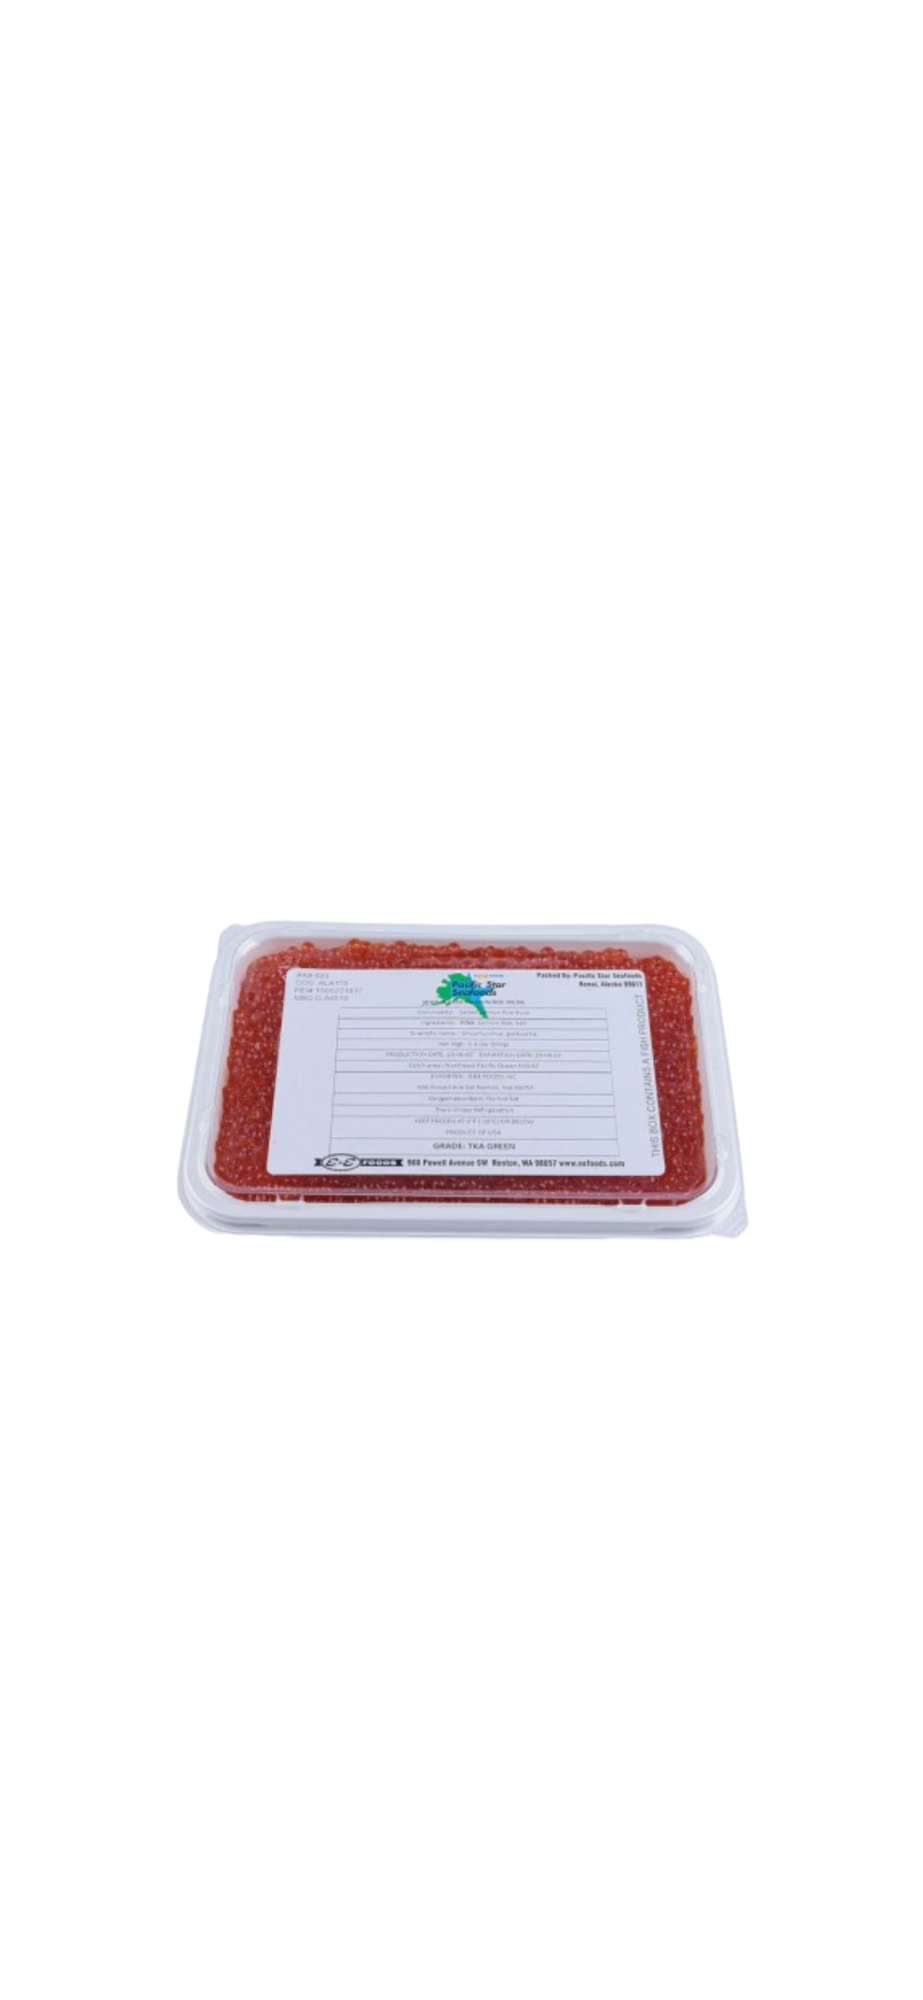 Pink Frozen Caviar - Pacific Star Seafoods - 1.1lb (500g)